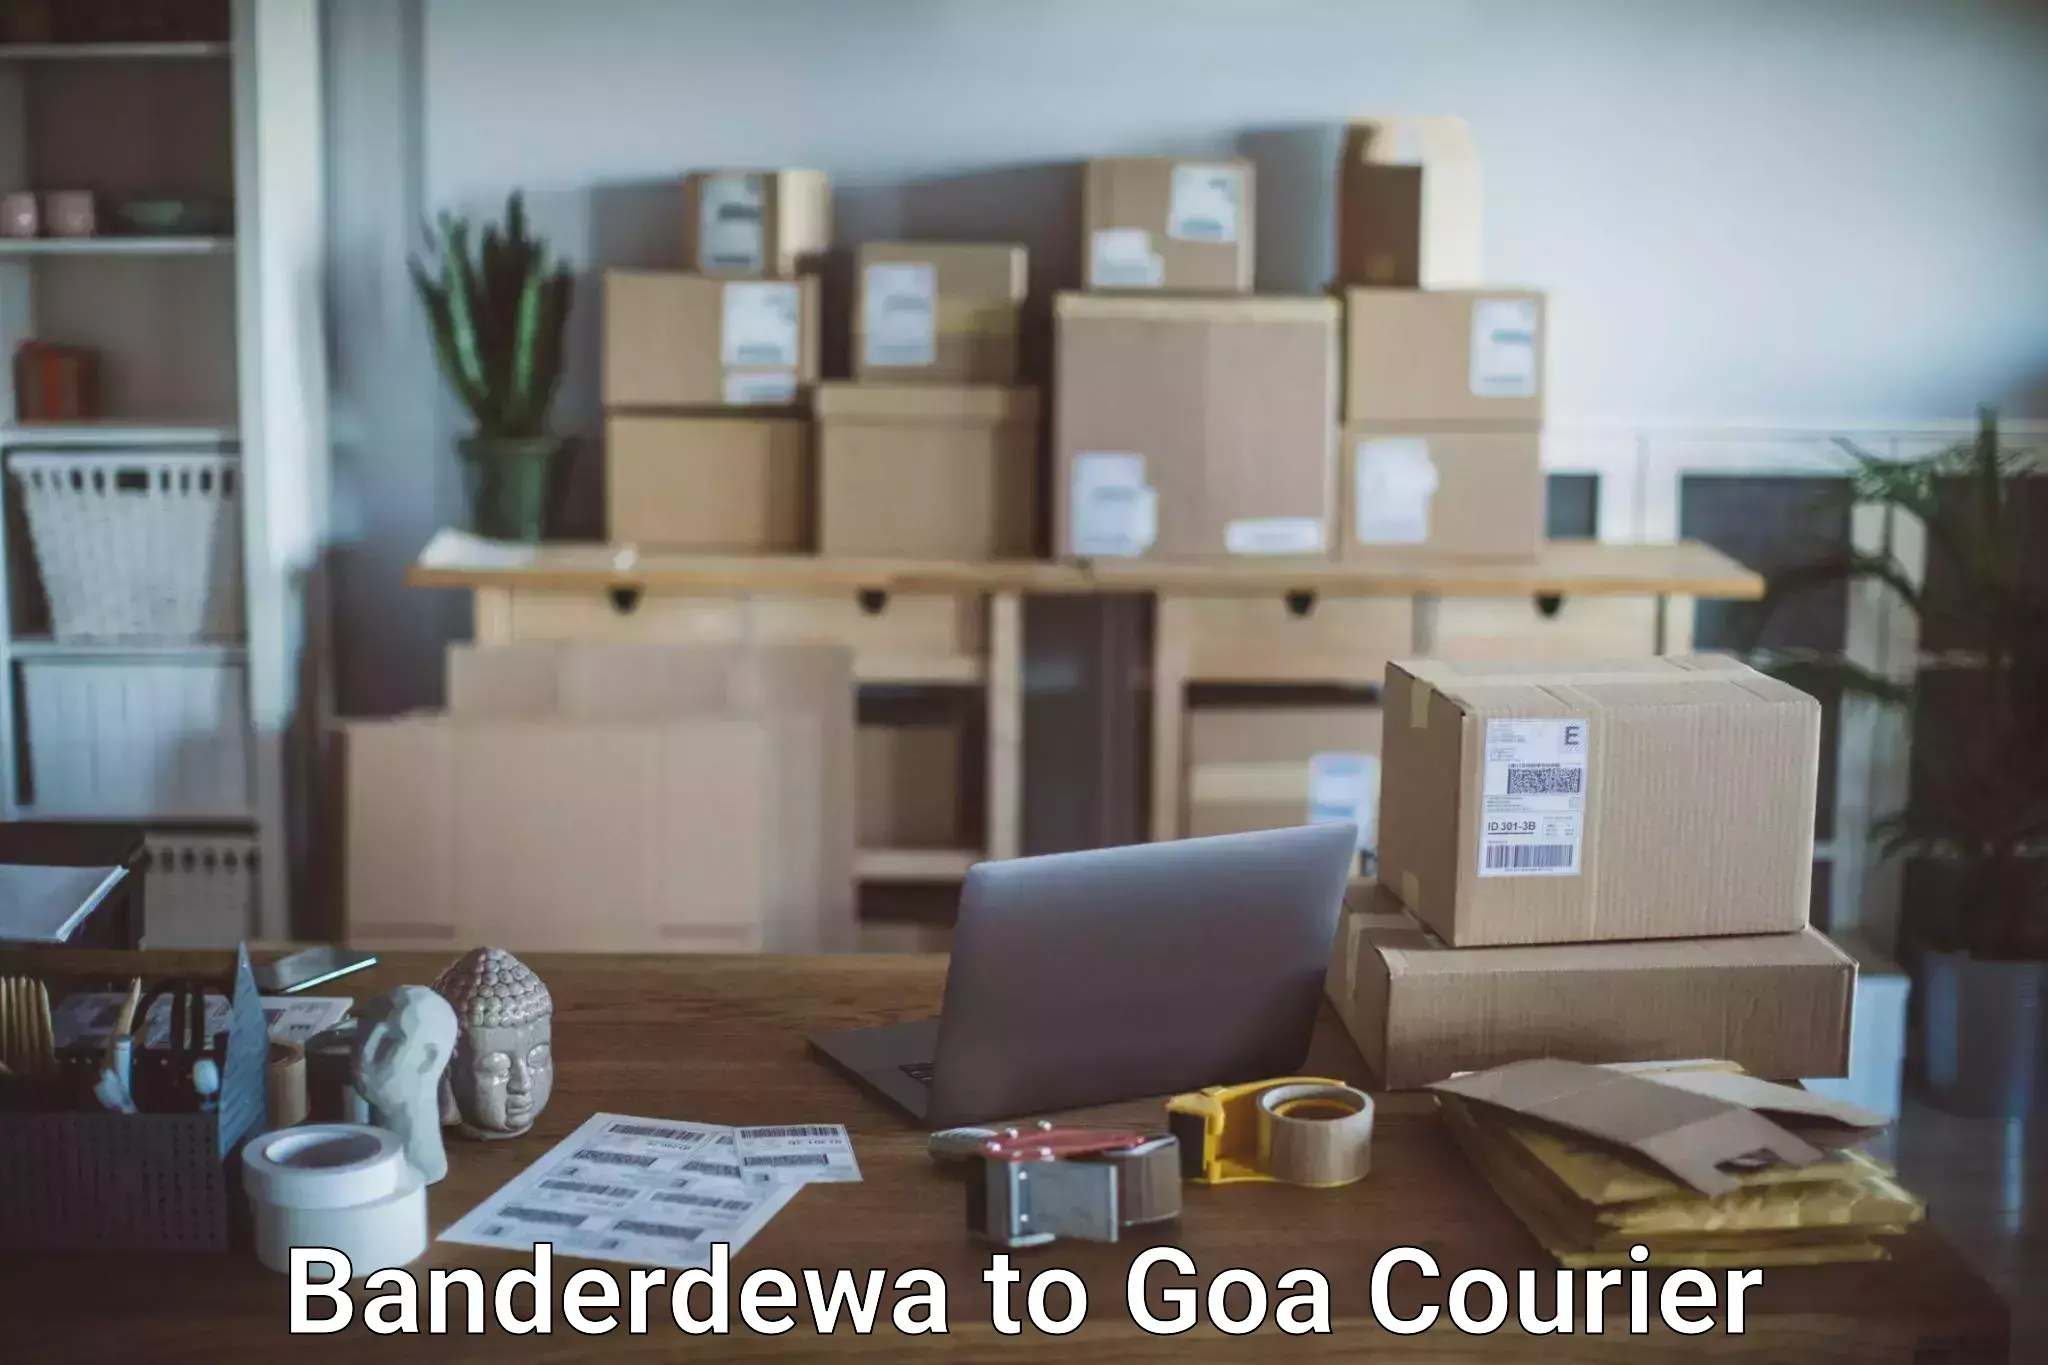 Instant baggage transport quote Banderdewa to Goa